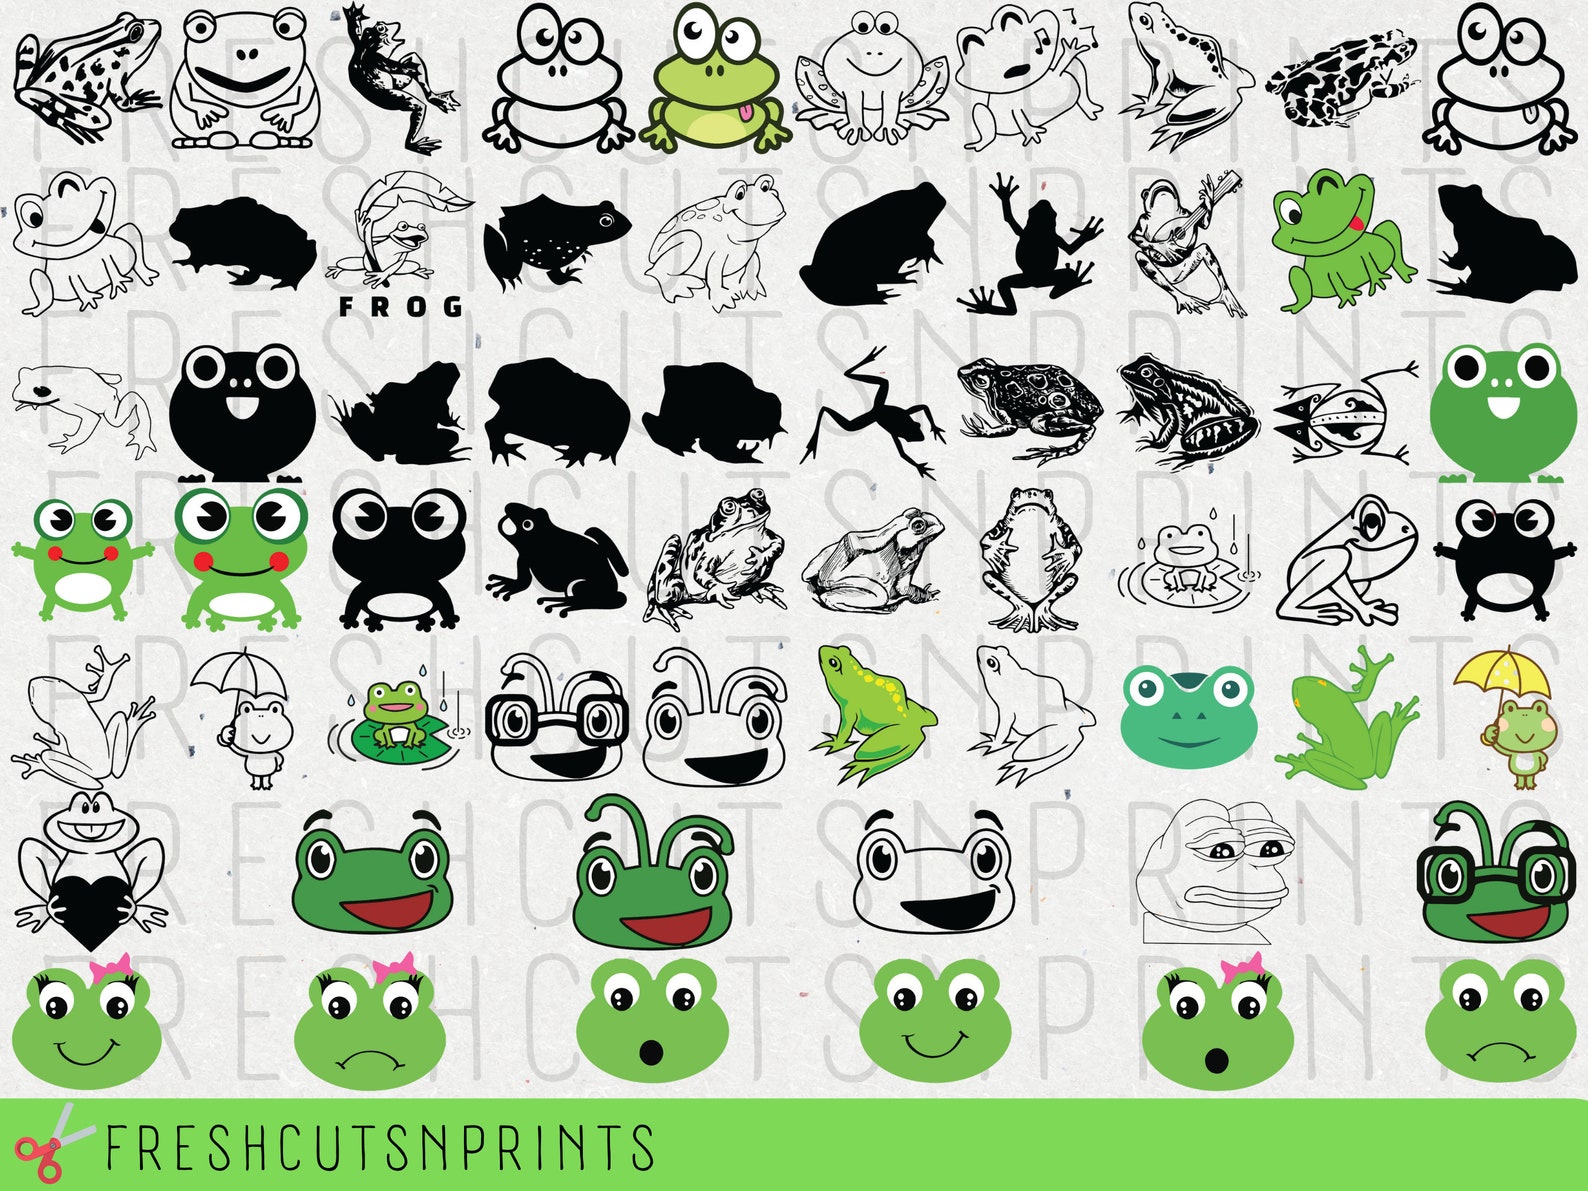 Collection of frog cliparts.